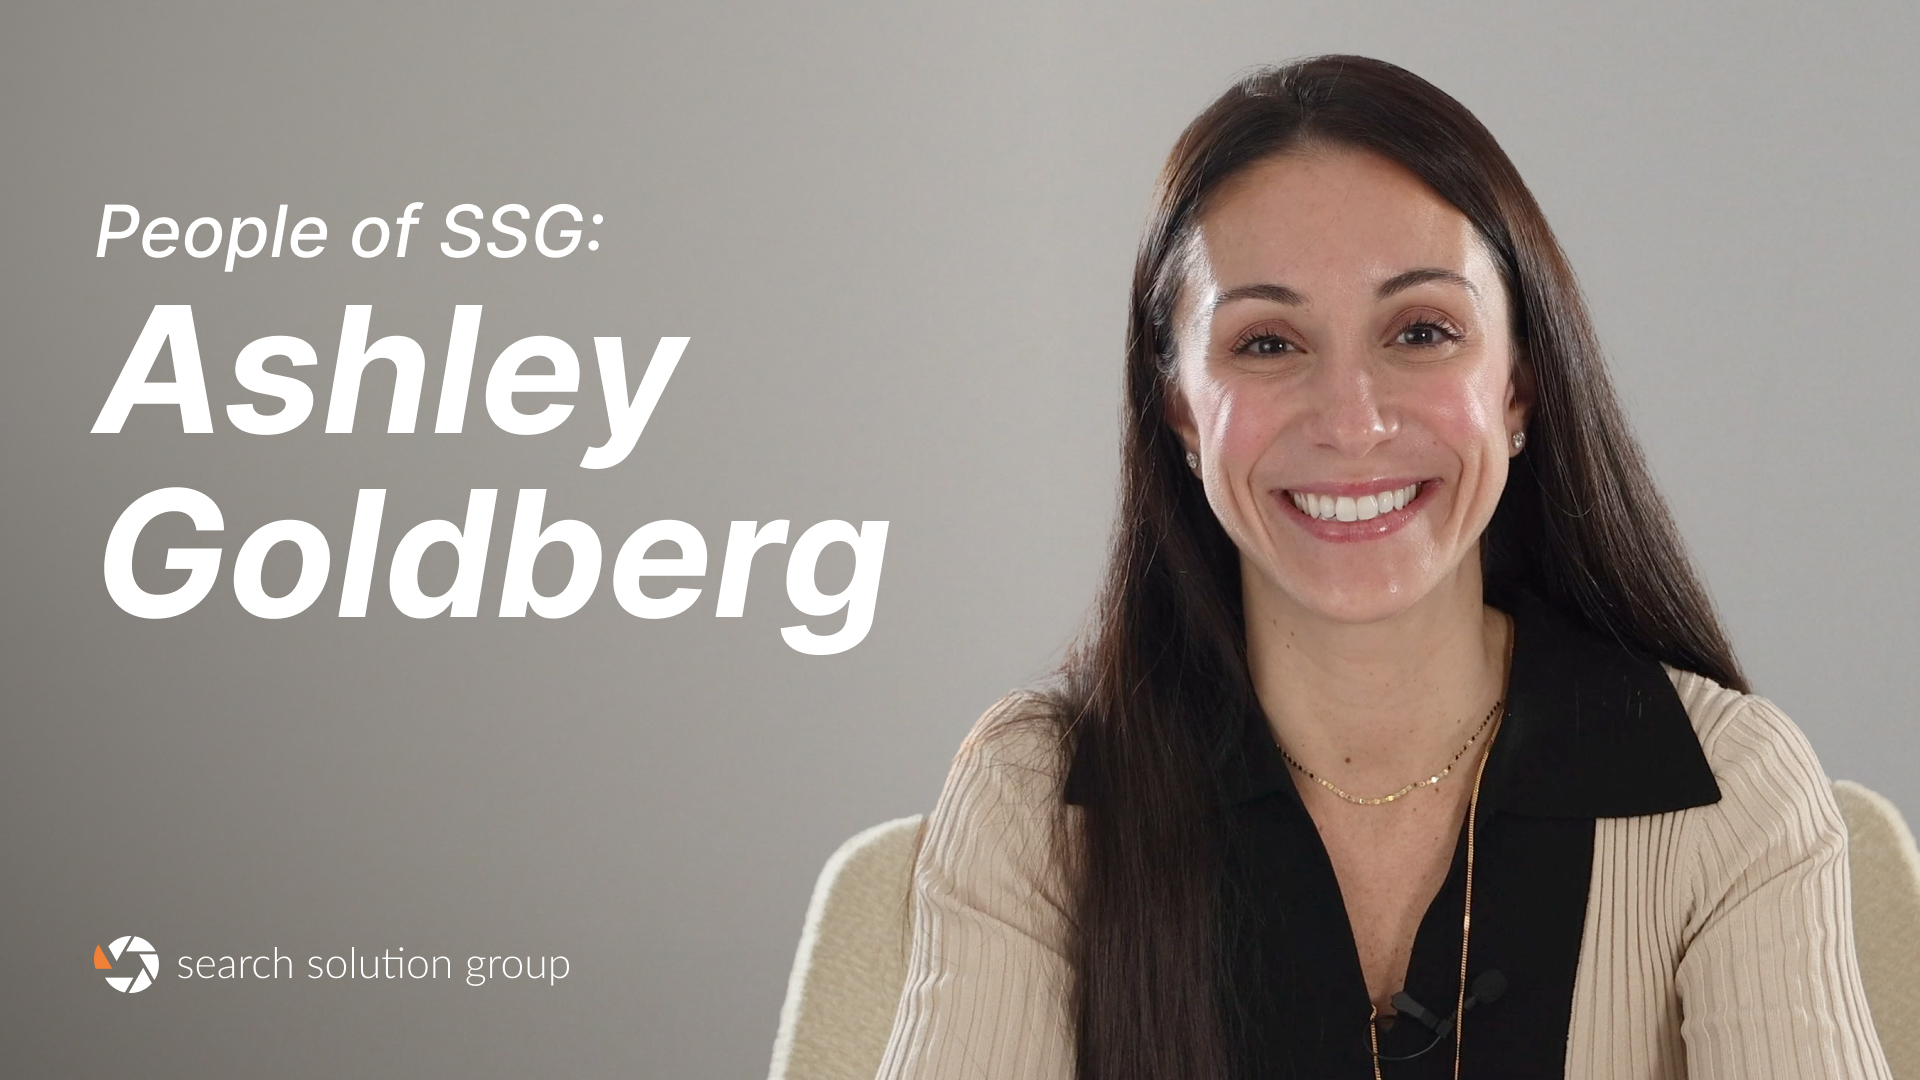 The People of SSG: Q&A with Ashley Goldberg